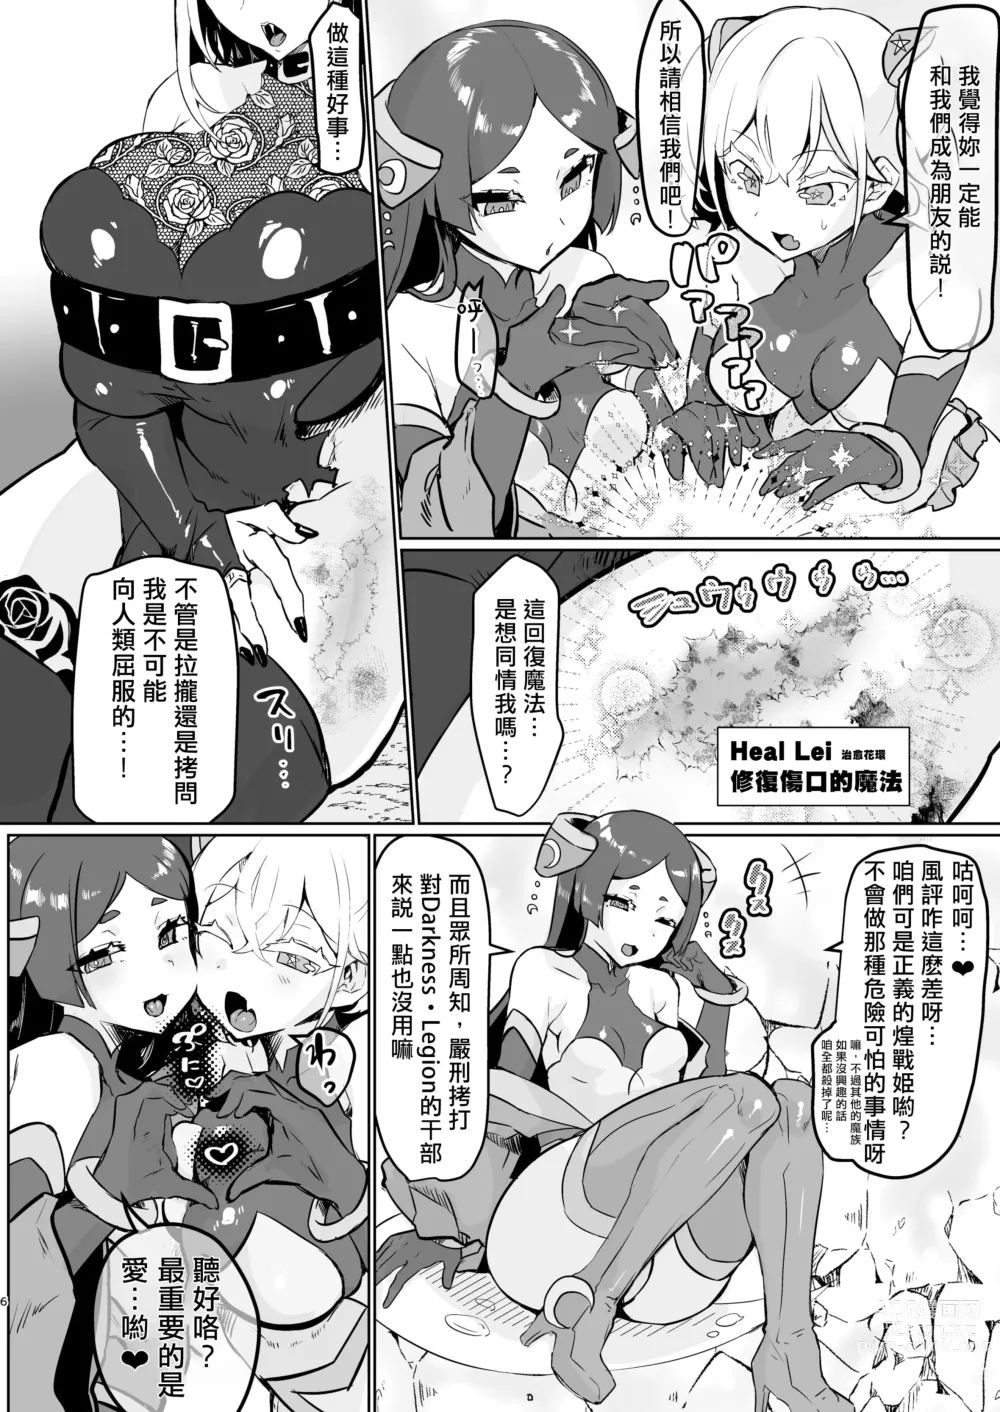 Page 6 of doujinshi 邪恶组织女干部正堕